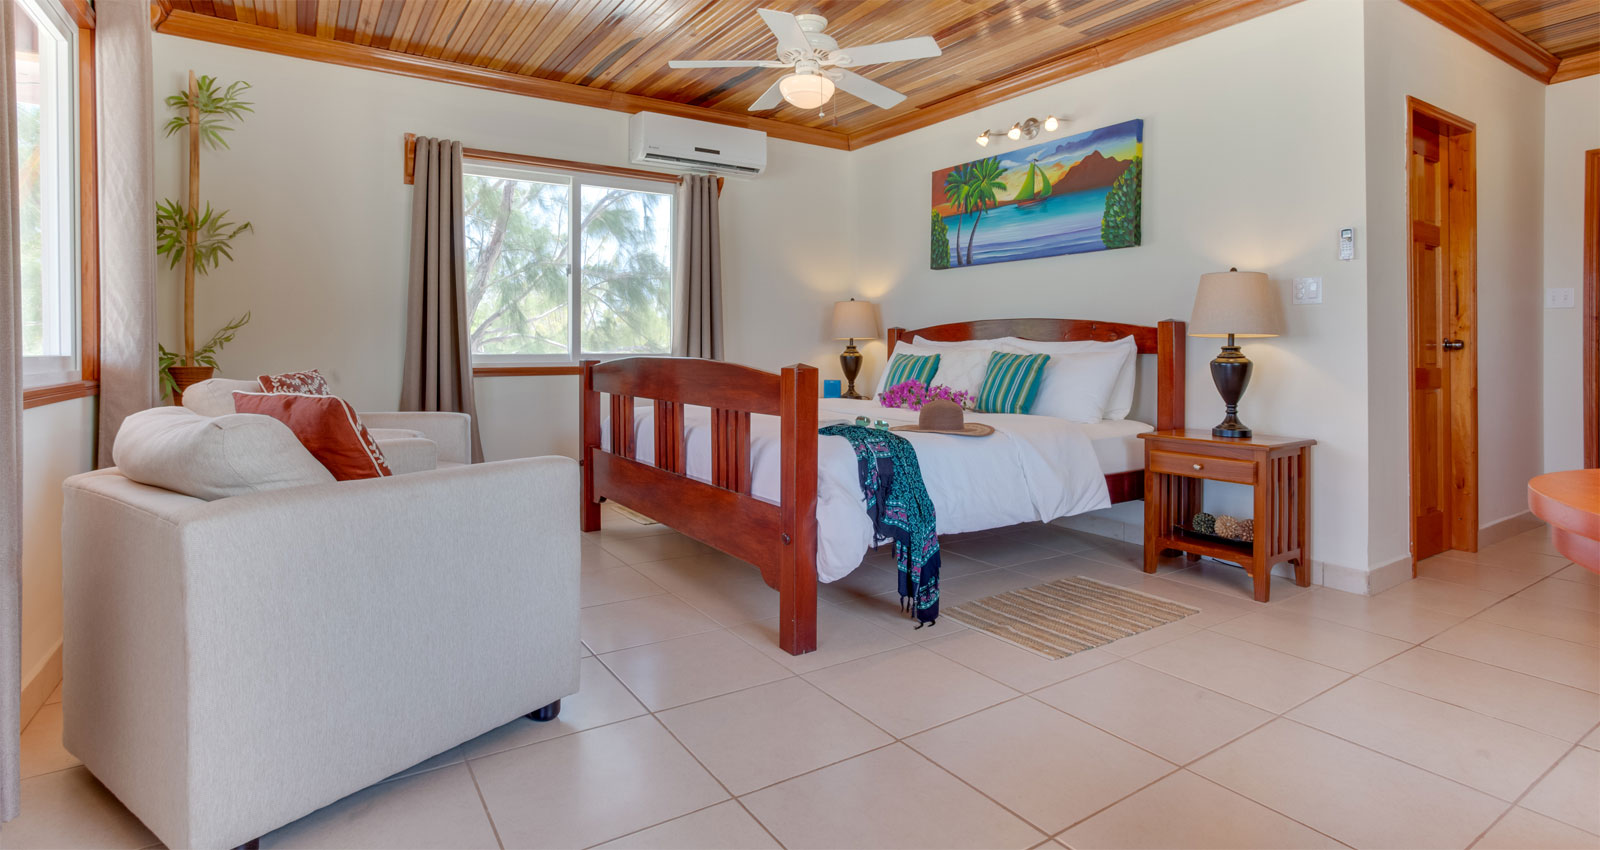 The interior of one of the Standard Belize beach cabanas along the waterfront at Coco Plum Resort.